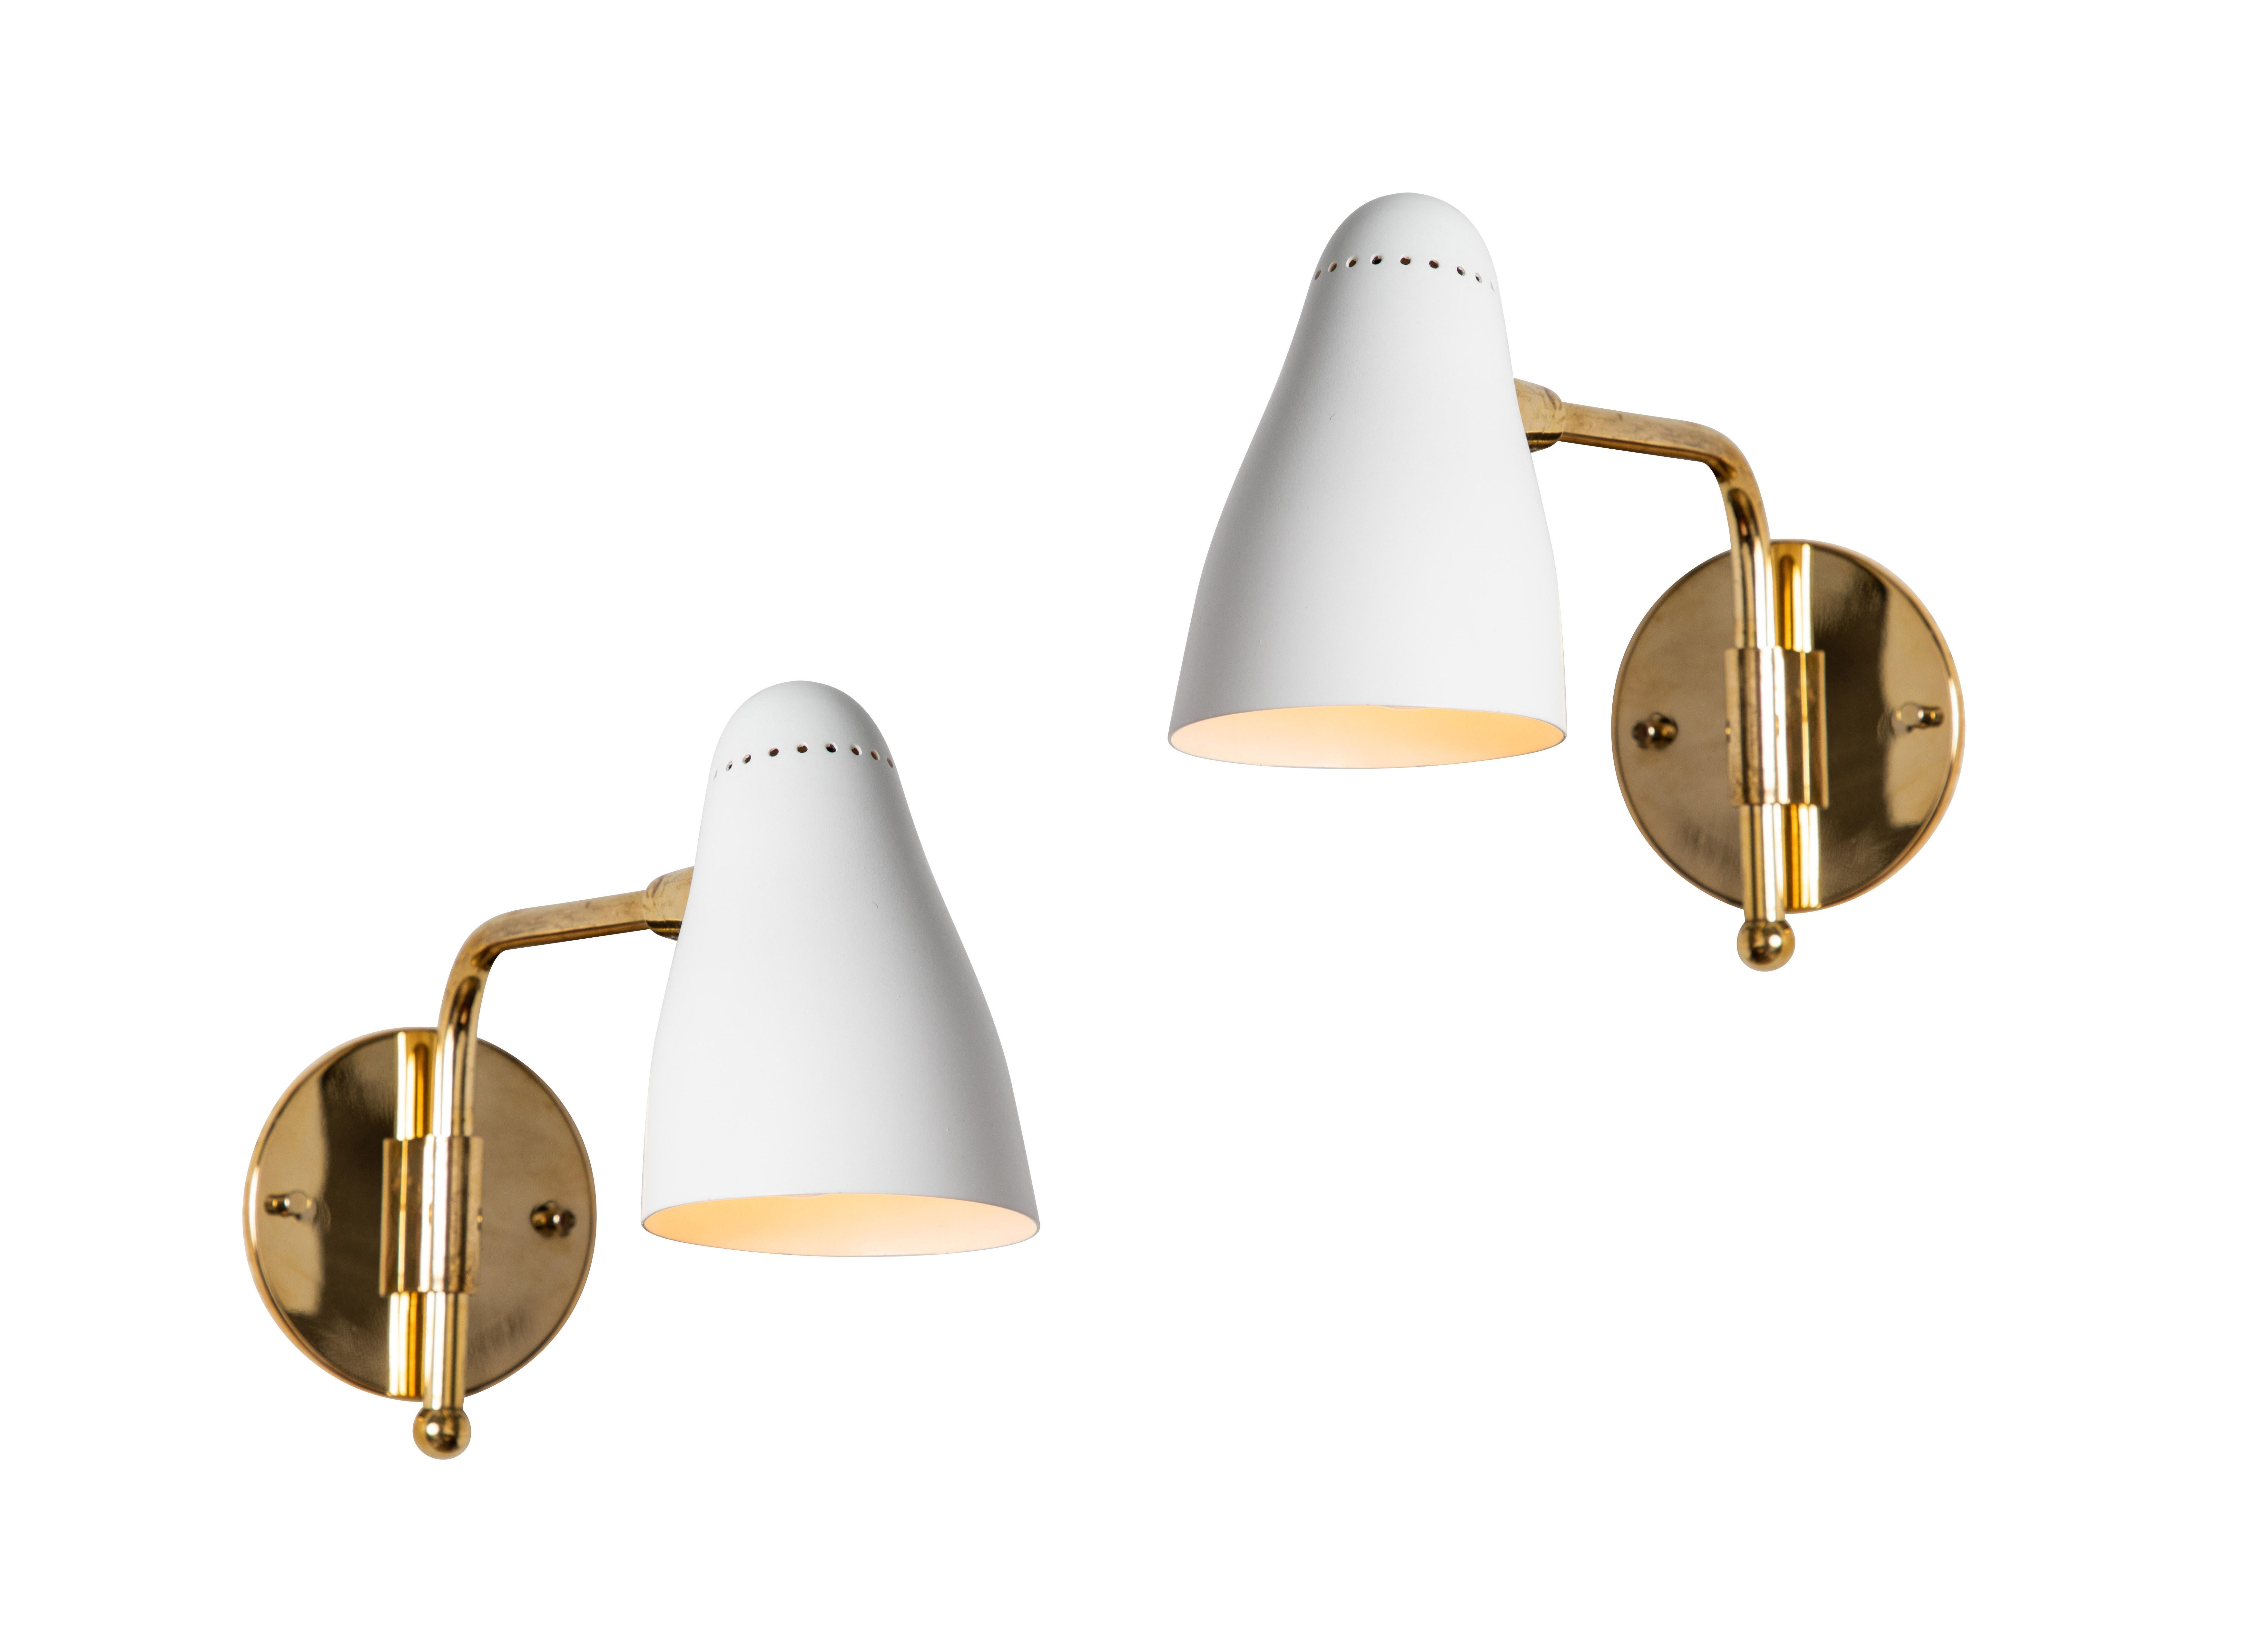 Pair of 1950s Giuseppe Ostuni articulating sconces for O-Luce. Executed in brass and white painted aluminum with perforated shade. Shade pivots up/down on a ball joint and arm rotates freely left/right. A very rare and exceptional example of